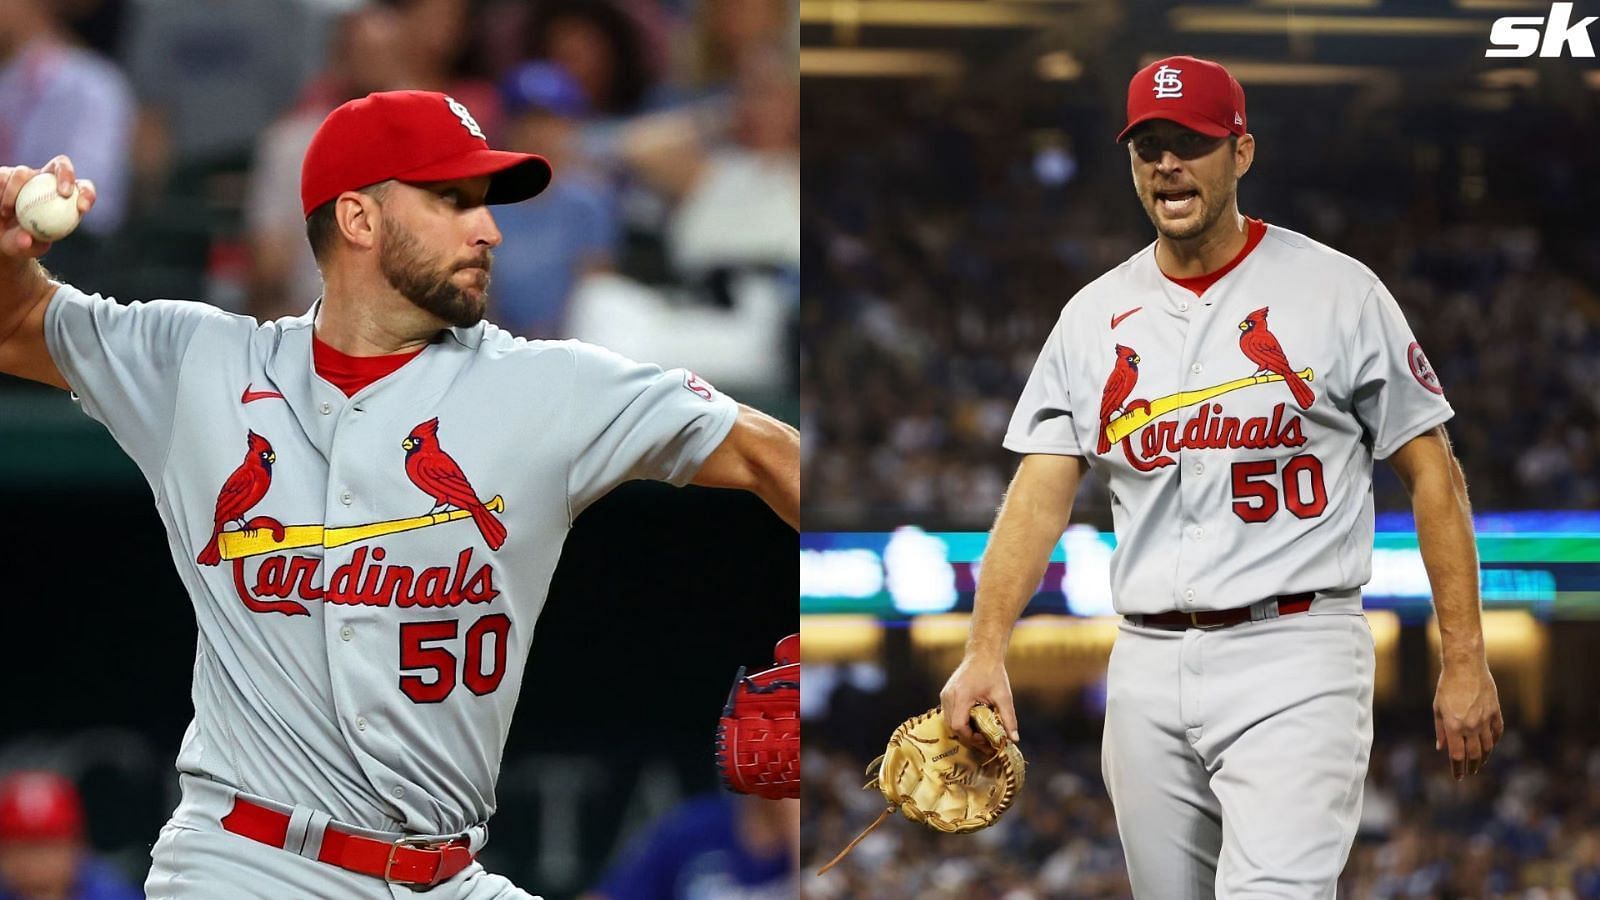  St. Louis Cardinals pitcher Adam Wainwright is frustrated with the team&rsquo;s awful season